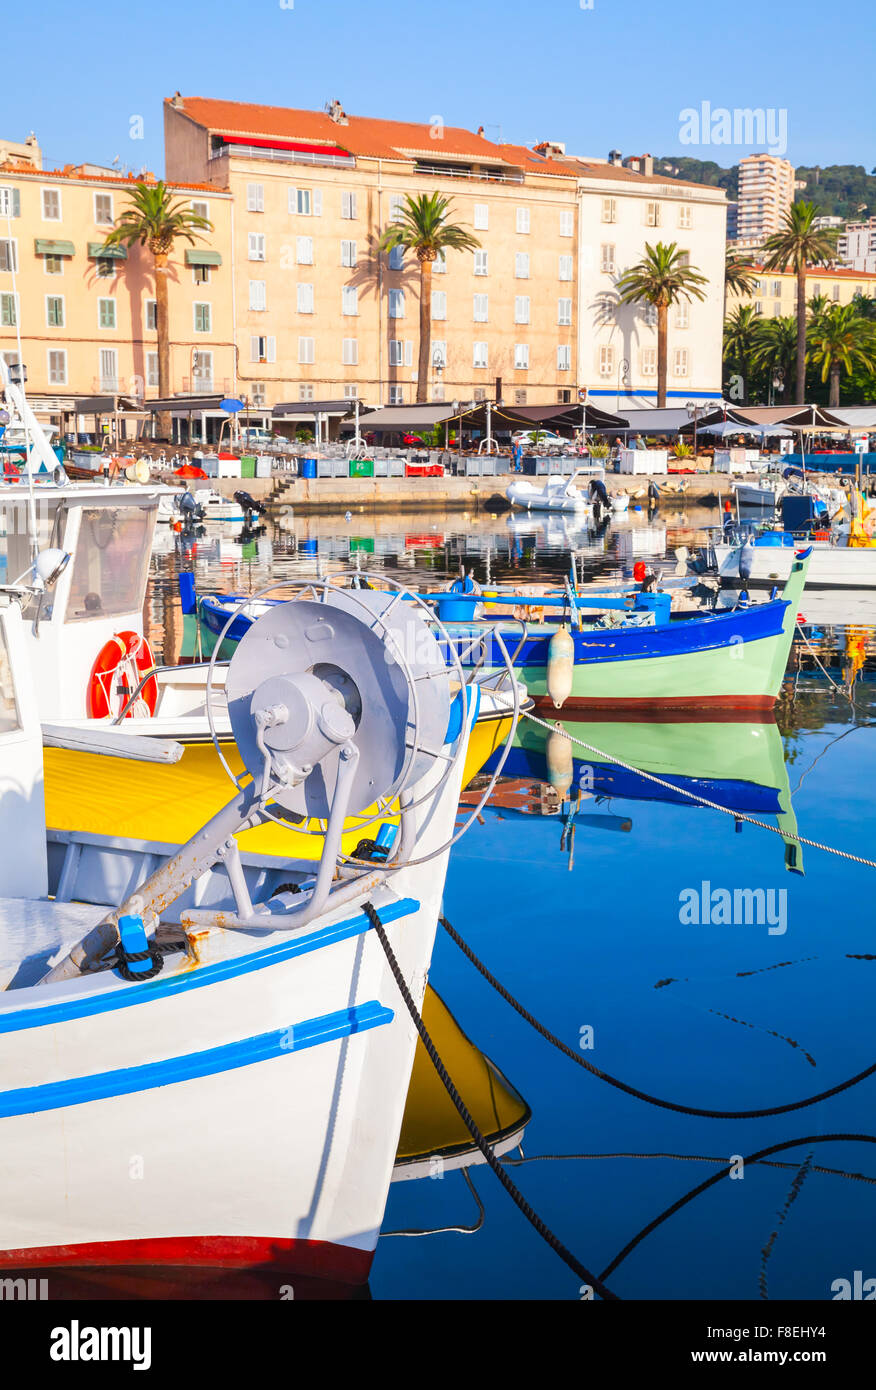 Small colorful wooden fishing boats moored in old port of Ajaccio, Corsica, France Stock Photo